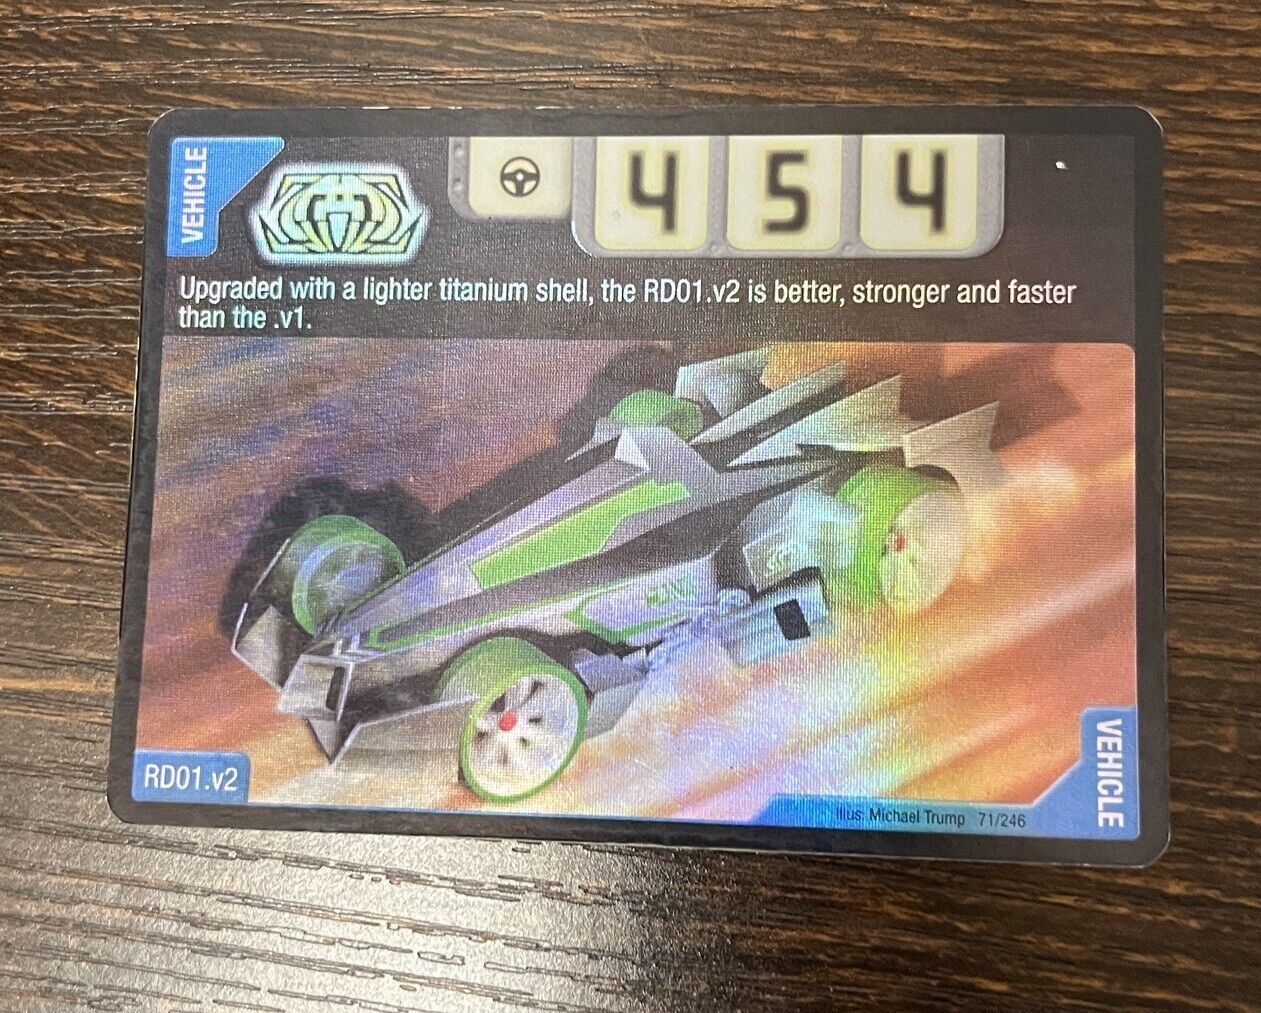 Acceleracers Foil Rd-01.v2 Card 71/246 Collectible Card Game Hot Wheels